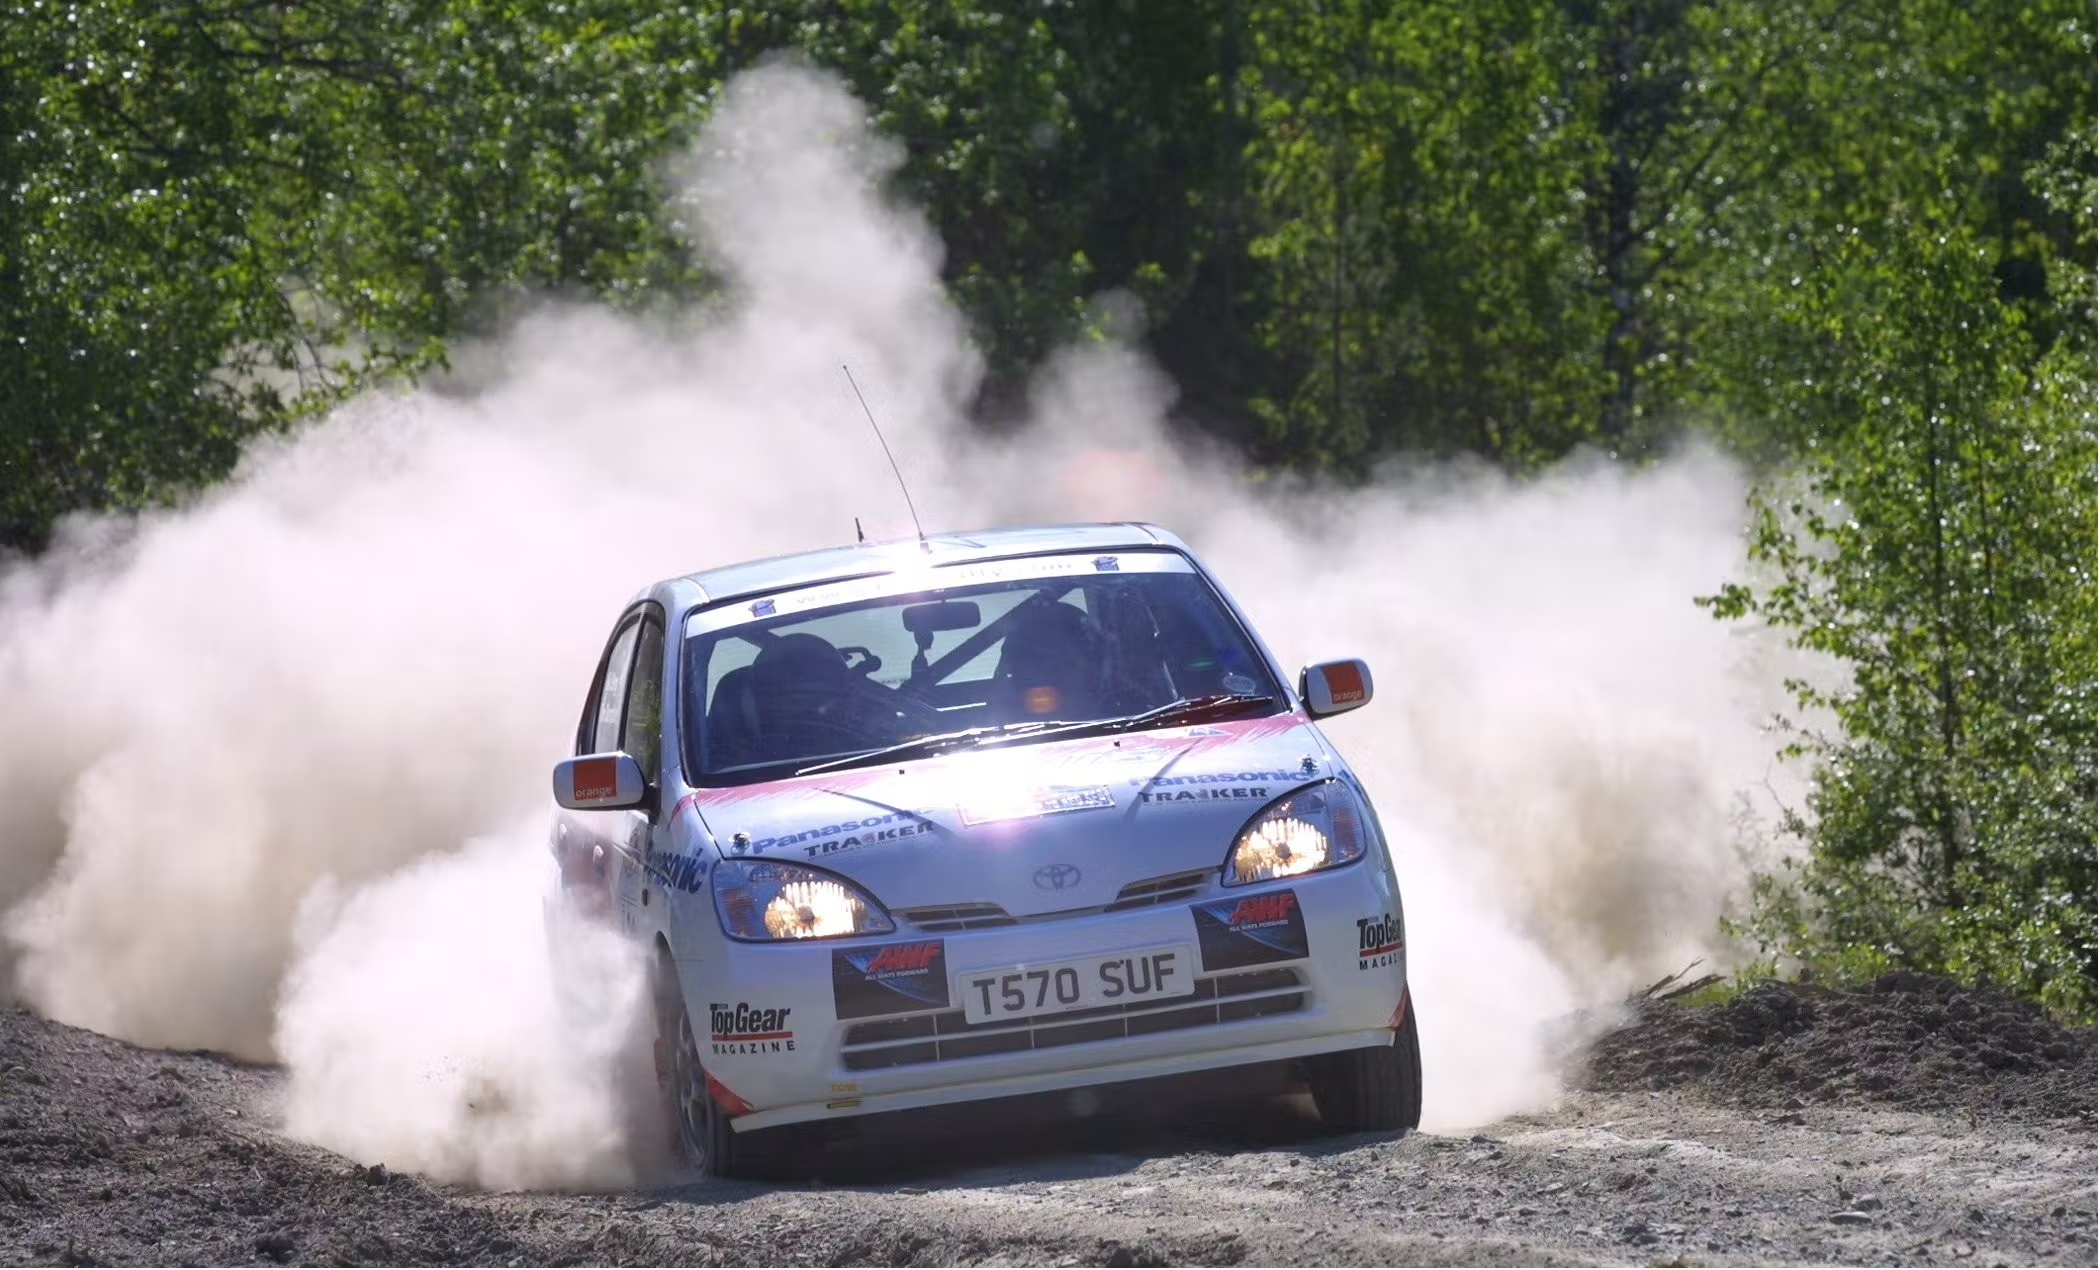 Hybrid-powered rally cars? Keep up – I did that 20 years ago